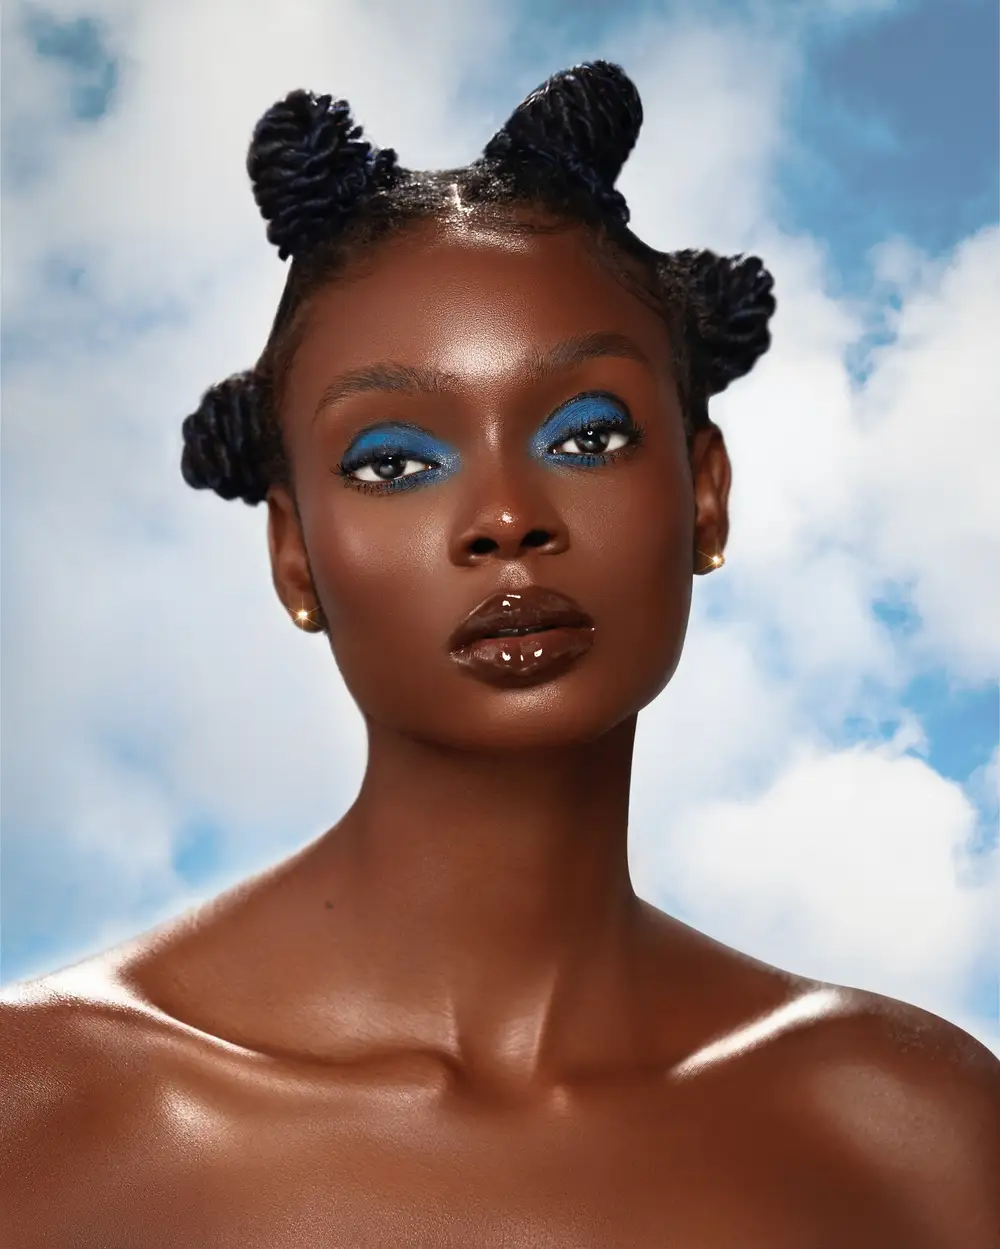 Picture of a model with heavy makeup and heads in the cloud